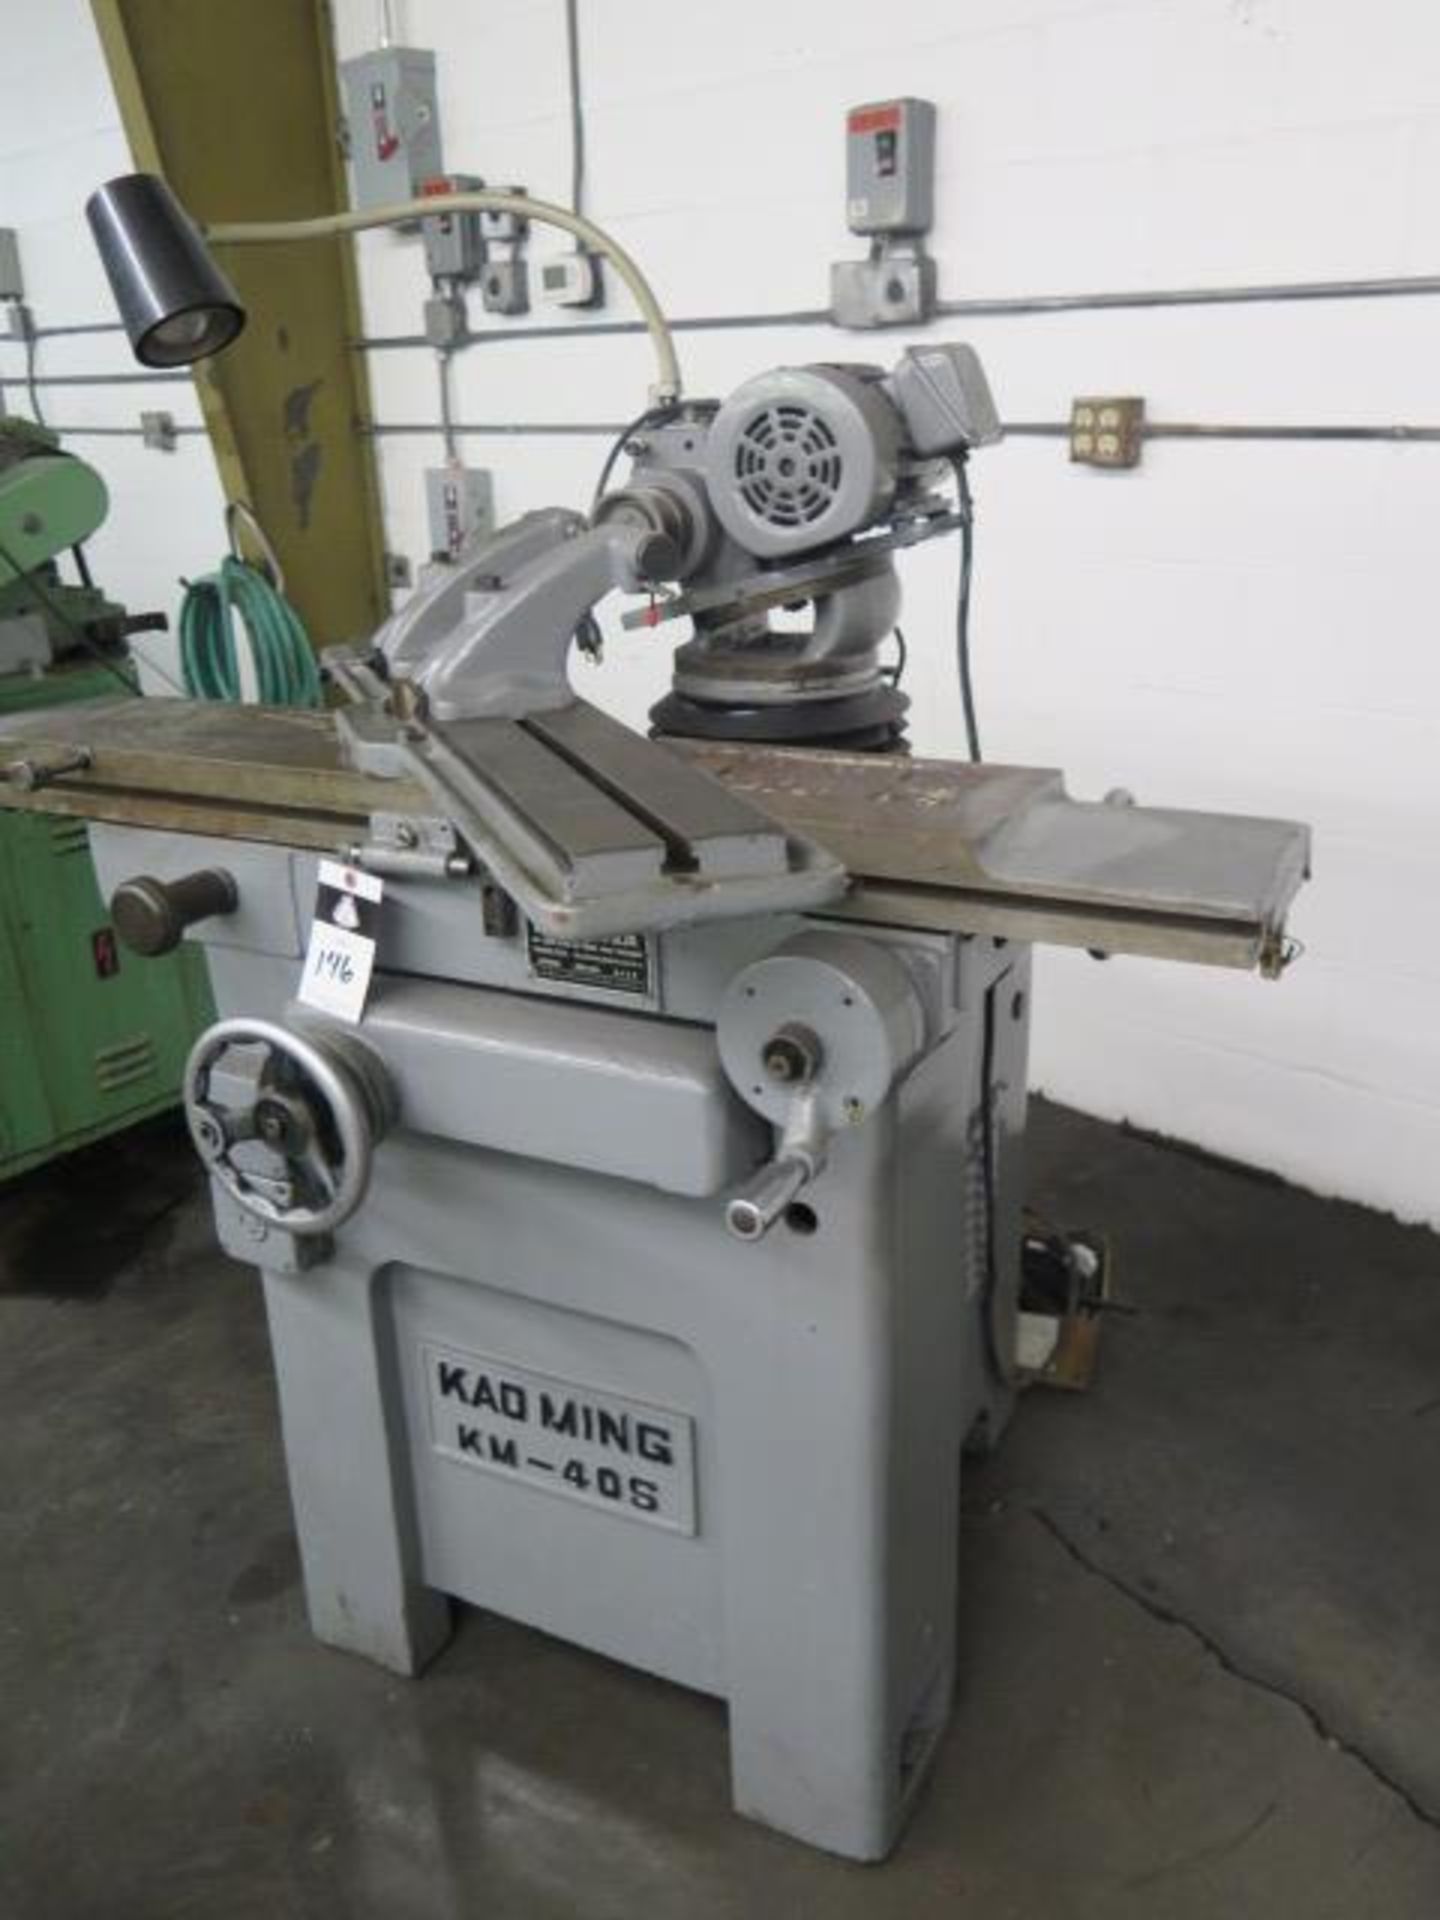 Kao Ming KM-40S 10” x 25” Cylindrical Grinder s/n 1423 w/ Centers (SOLD AS-IS - NO WARRANTY) - Image 2 of 6